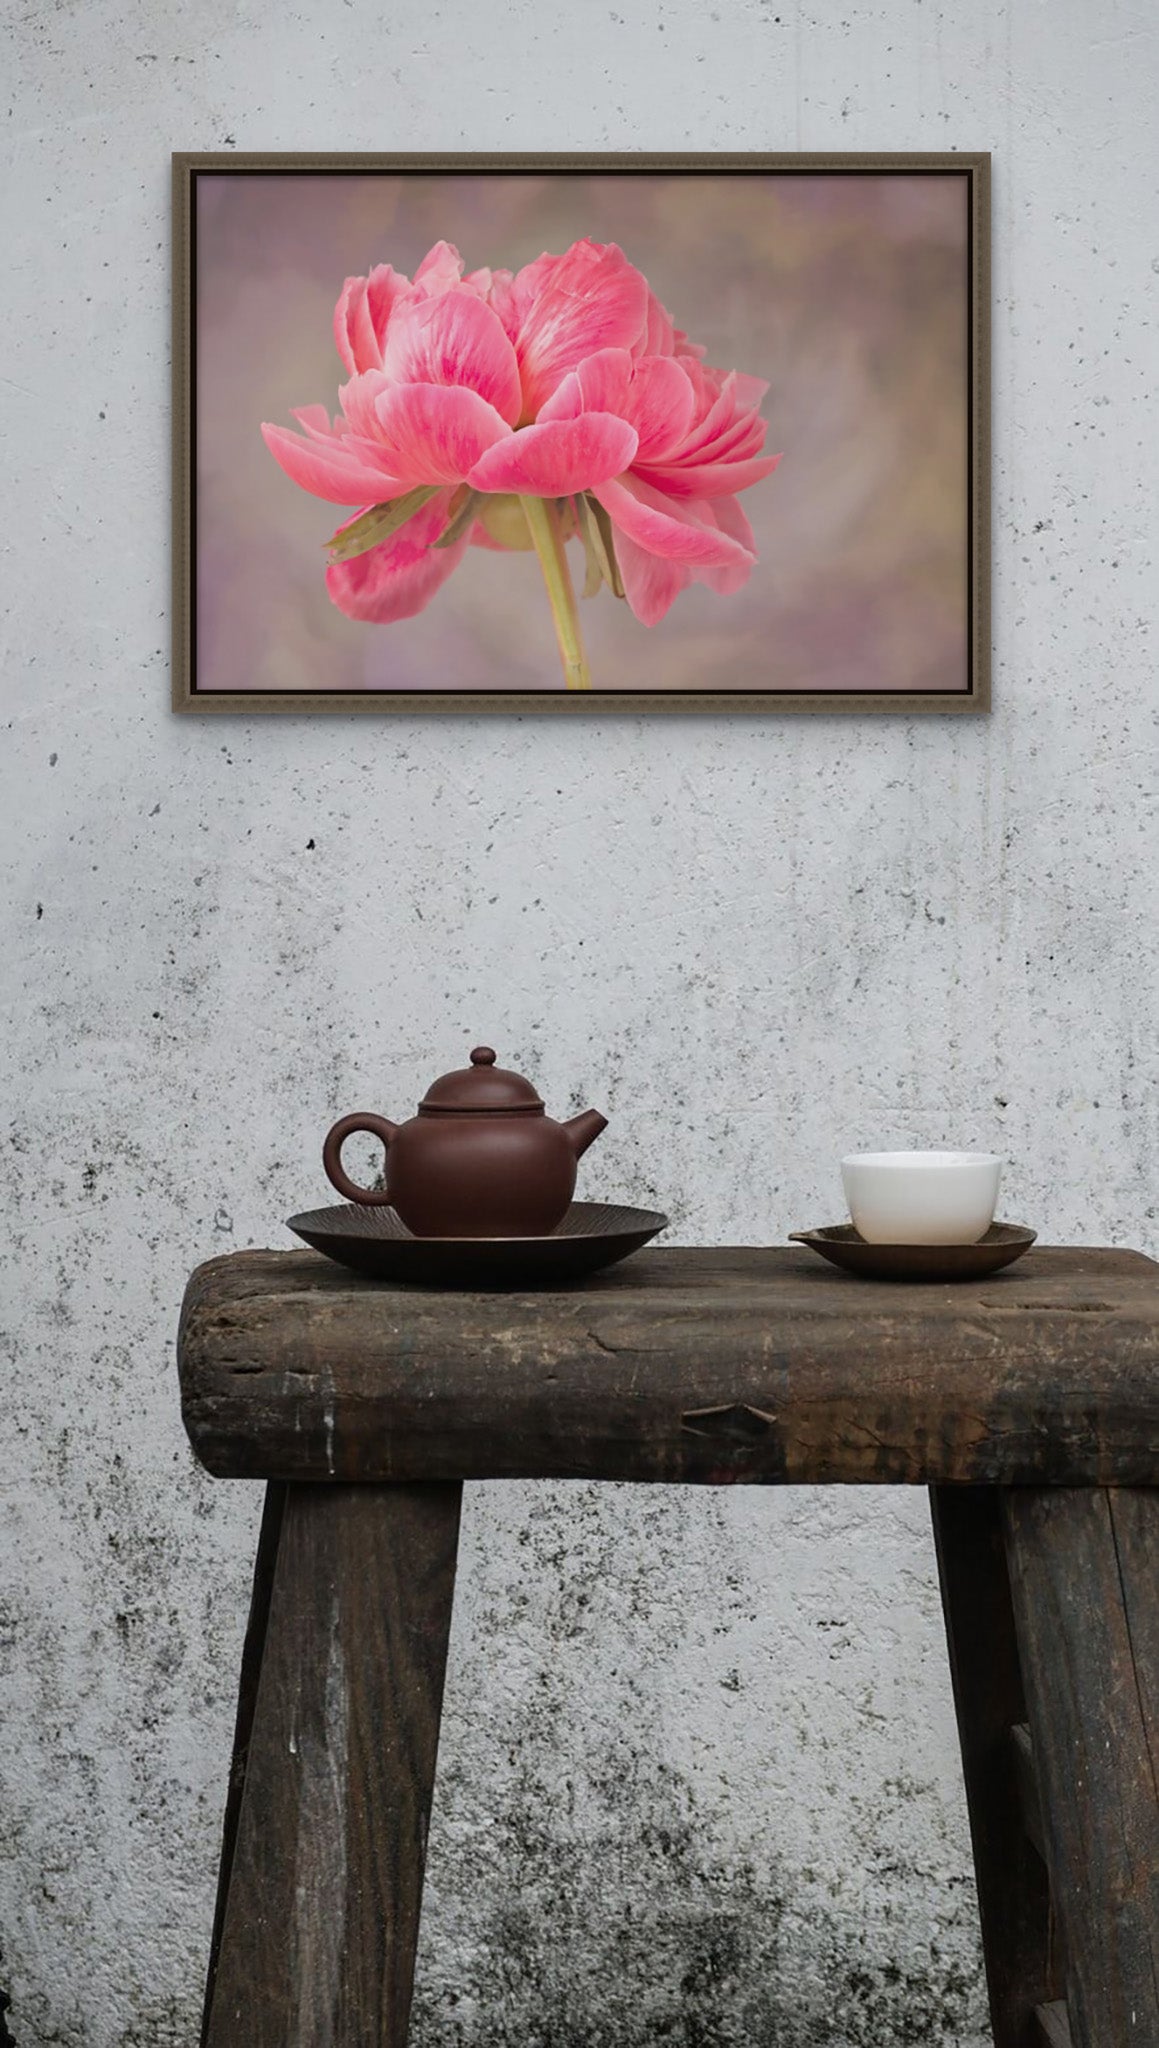 Picture hanging on the wall of a room with a rustic table. The photograph is in a float frame. The photography is a fine art Metal print of pink Peony with the petals blowing in the wind. The photograph is by Cameron Dreaux. 